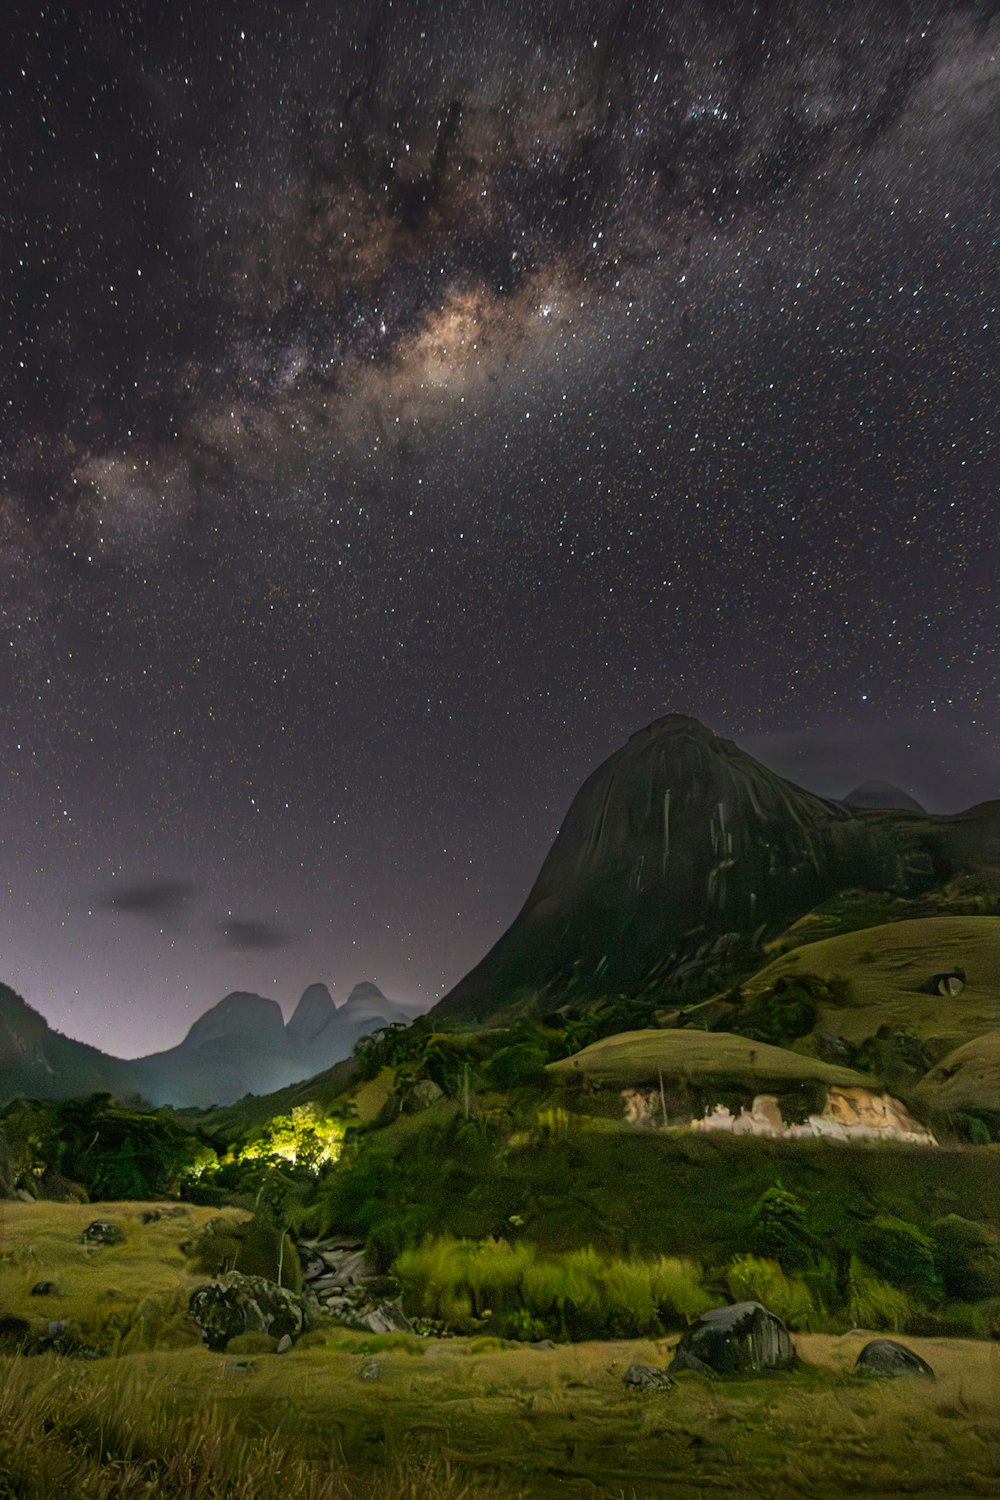 the night sky is filled with stars above a mountain range